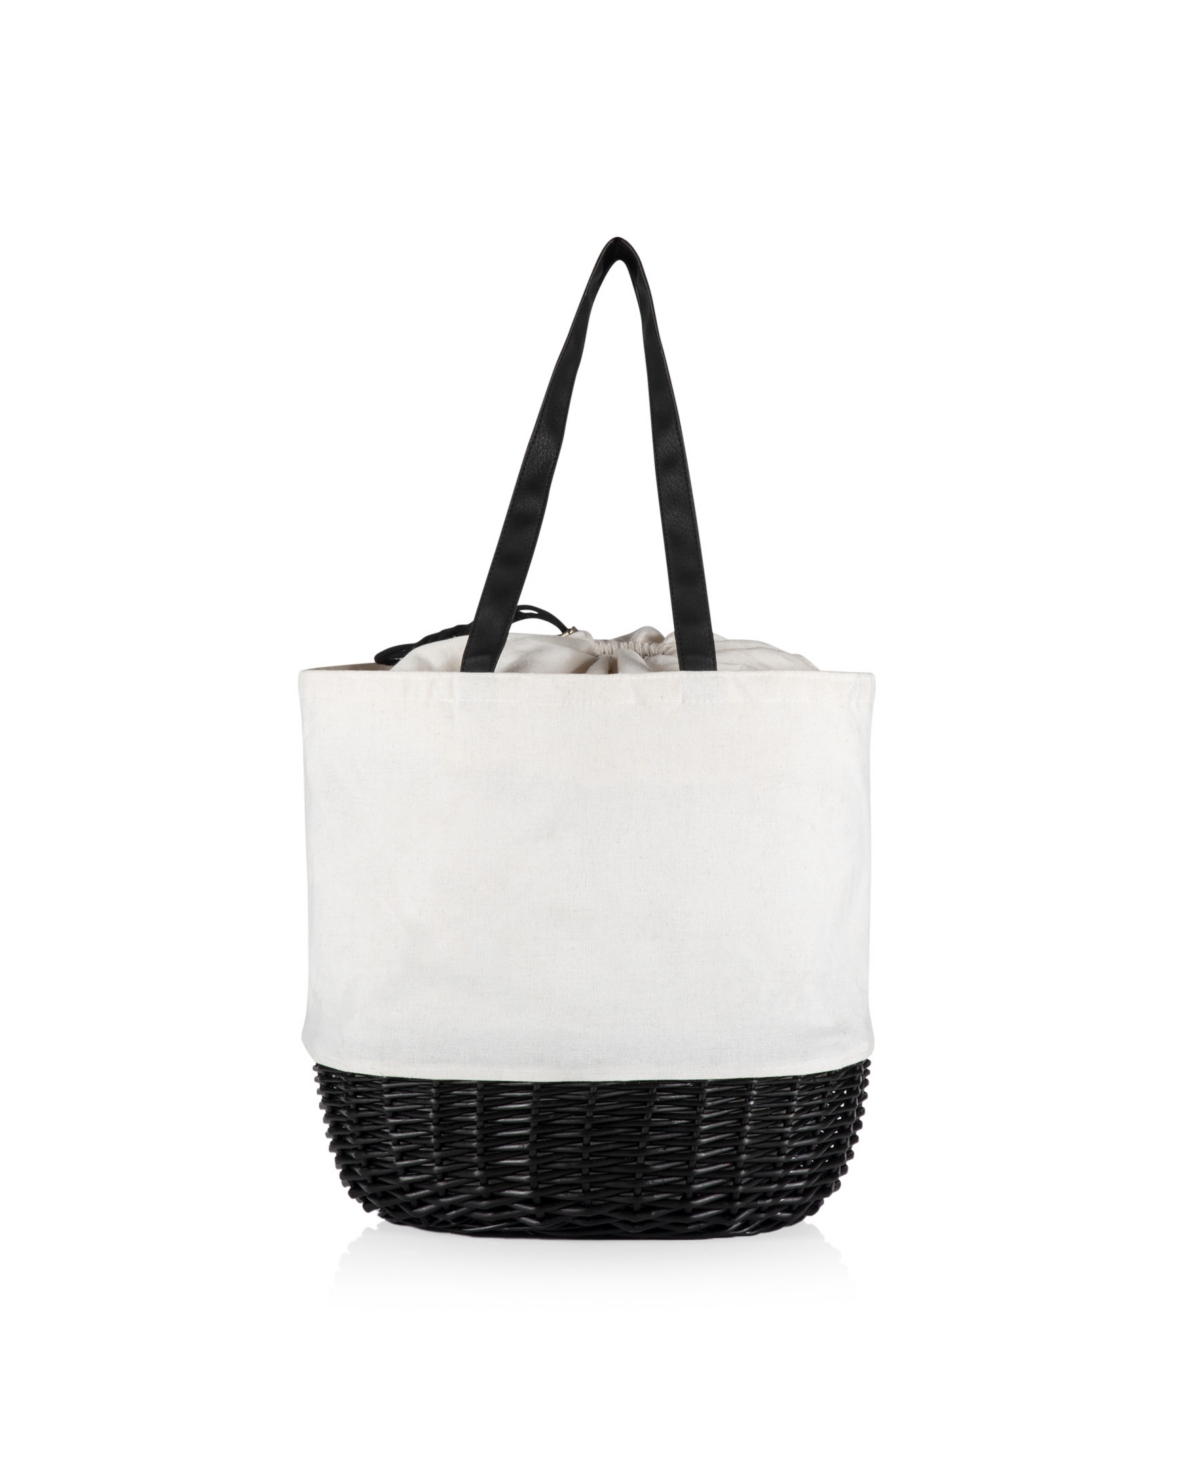 Picnic Time Coronado Canvas And Willow Basket Tote In White Canvas With Black Accents